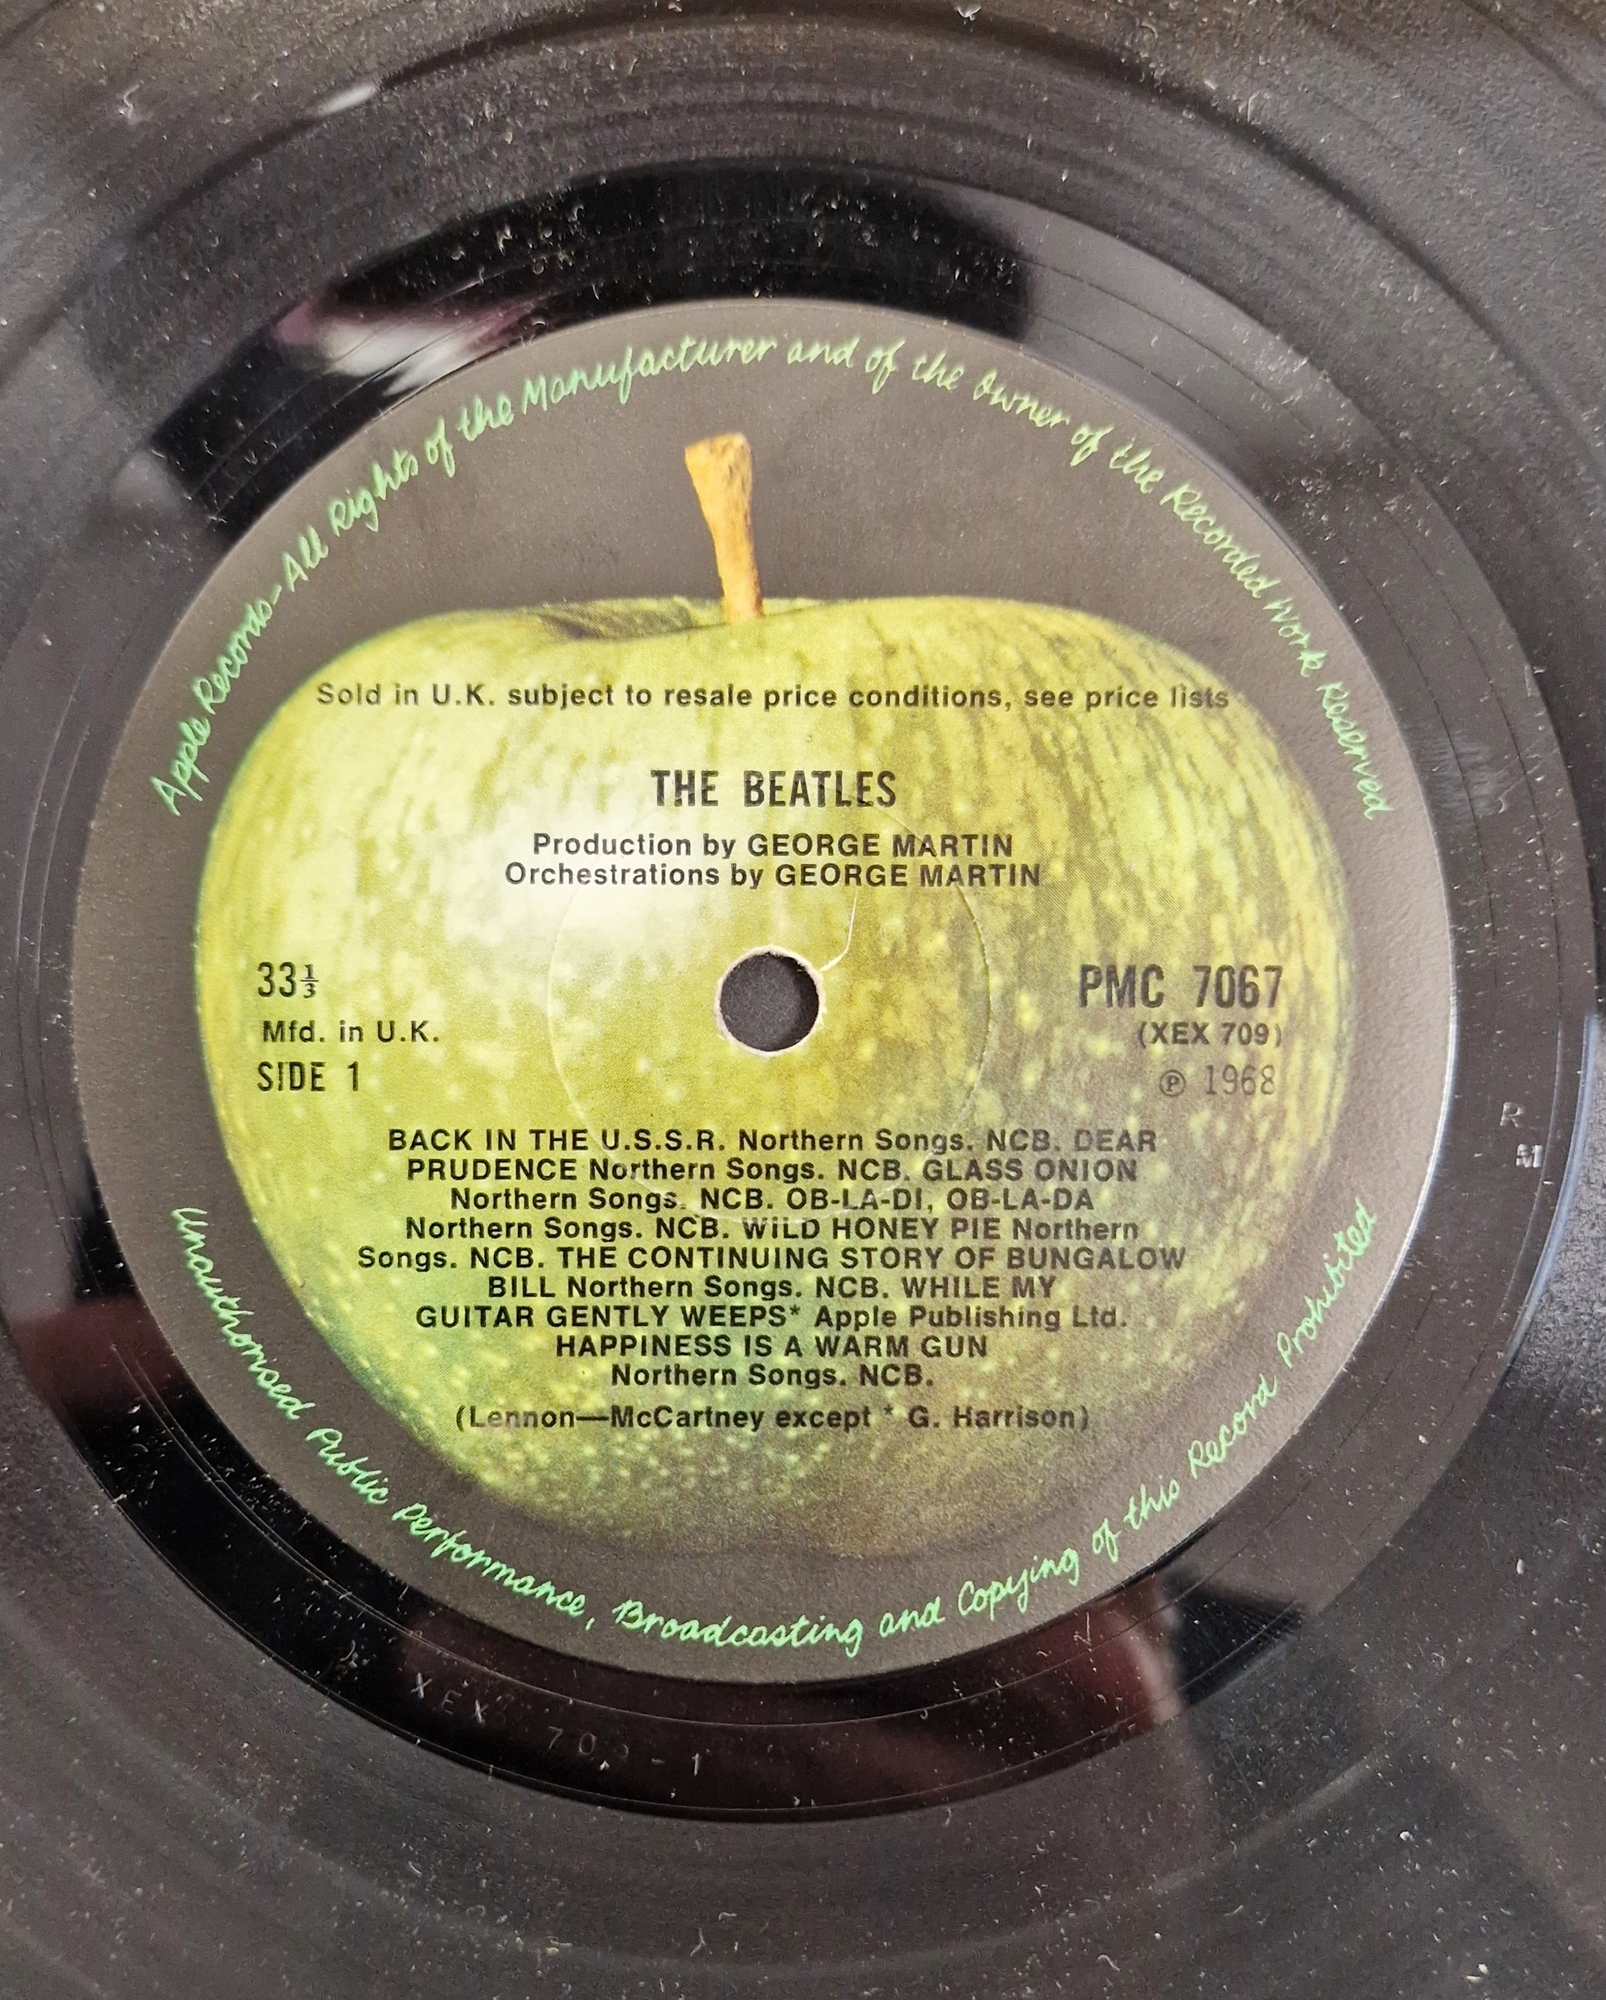 The Beatles, The Beatles (The White Album) PMC7067 (XEX-709/710/711/712-1), Misprint: does not - Image 4 of 5